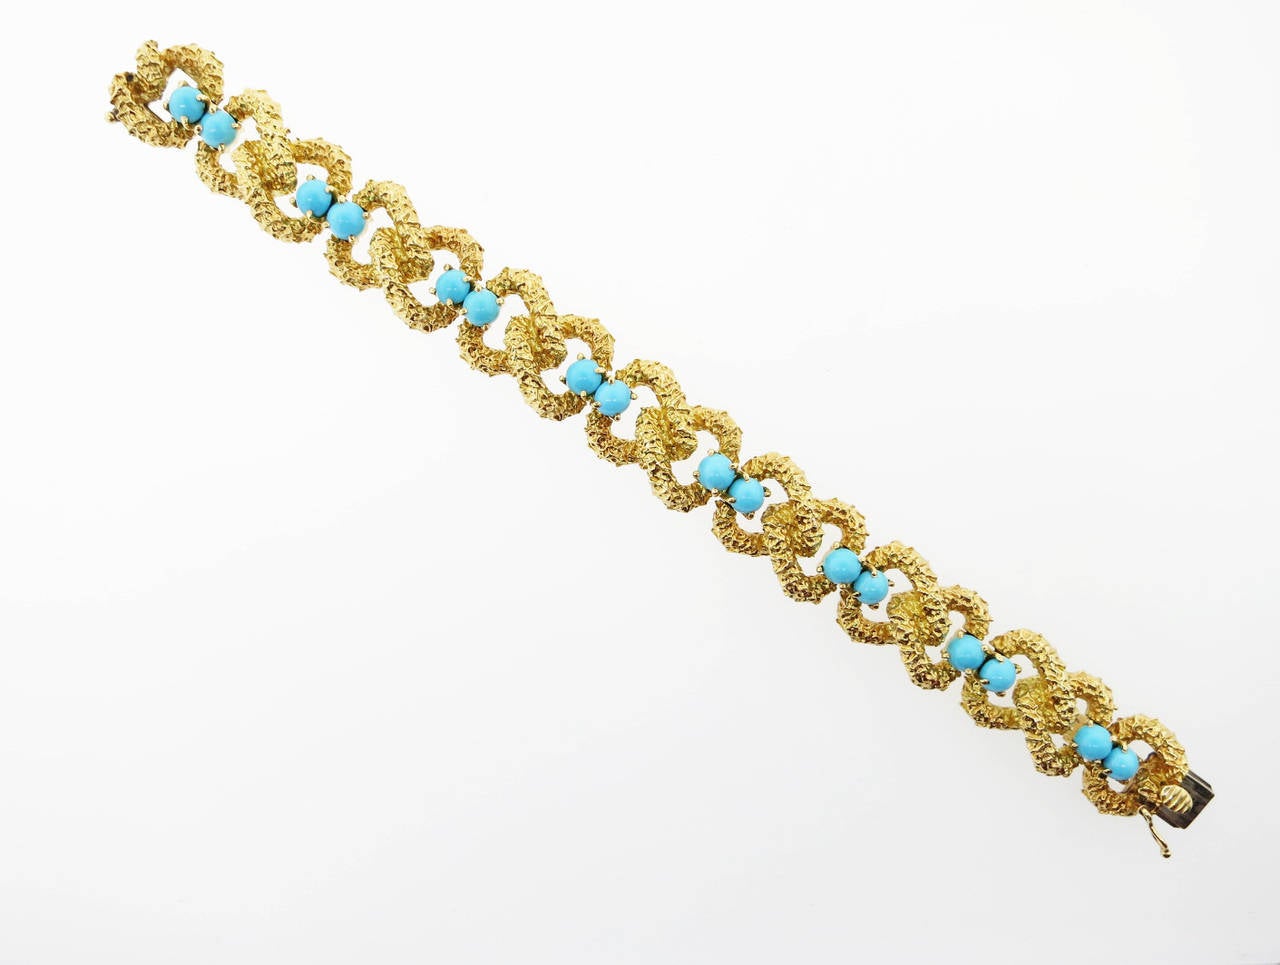 Bark finish 18kt. yellow gold link bracelet with turquoise. The bracelet is set with 16 natural robin egg blue turquoise cabachons each measuring approx 5mm. The bracelet measures 7 inches and weighs 59.6 gr. Circa 1960.